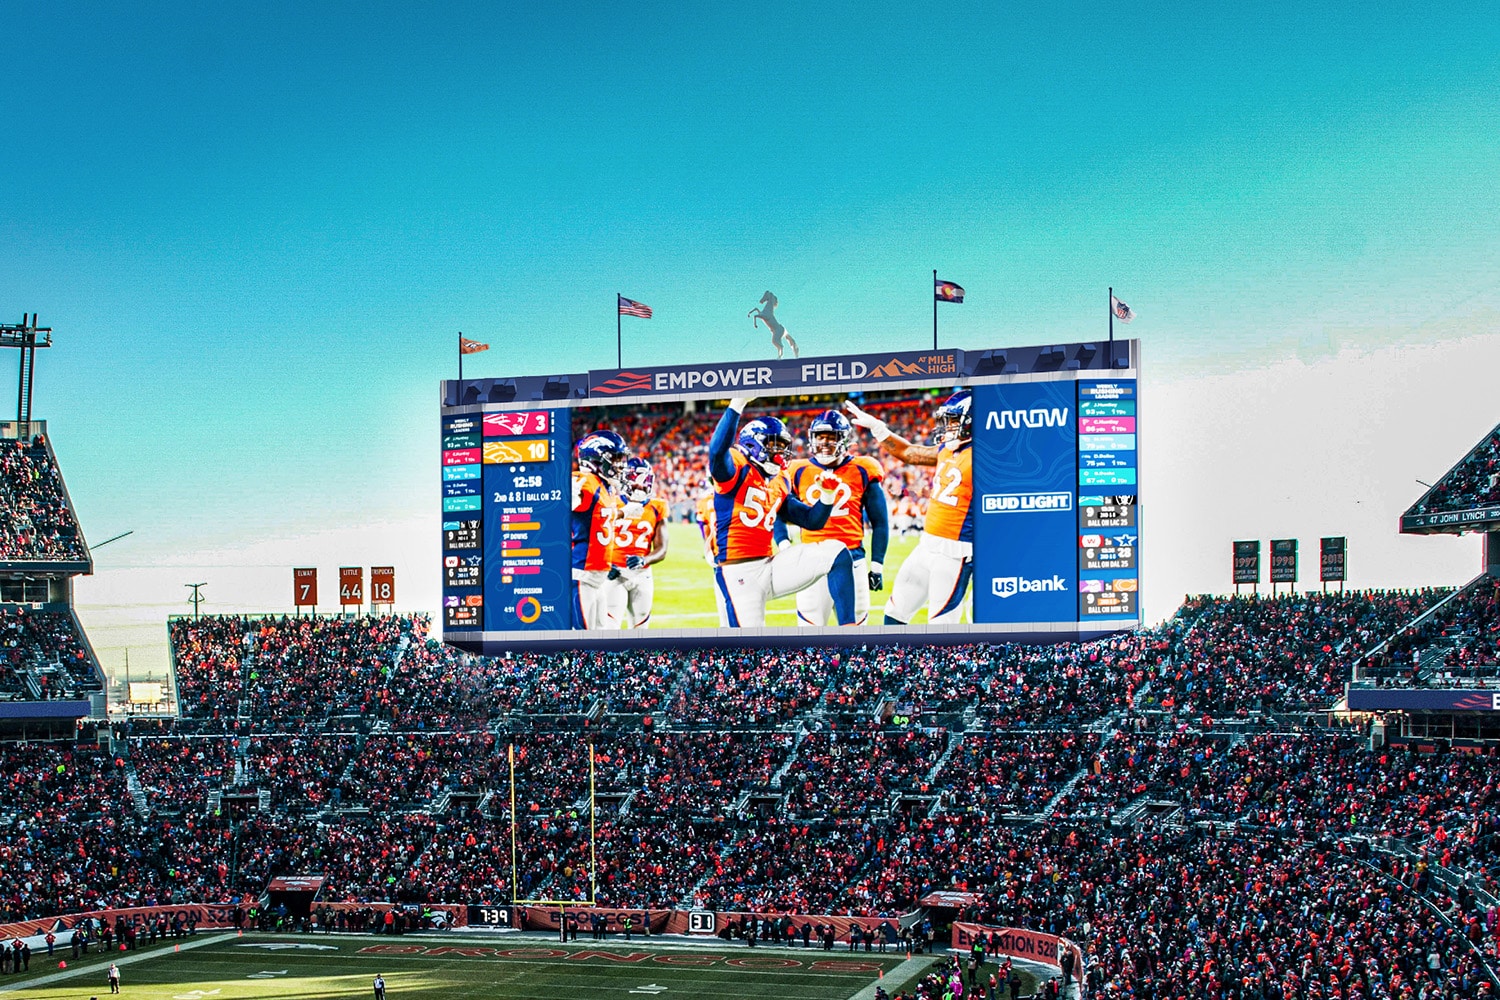 Scoreboard showing highlights and fans cheering at Broncos Stadium in Denver